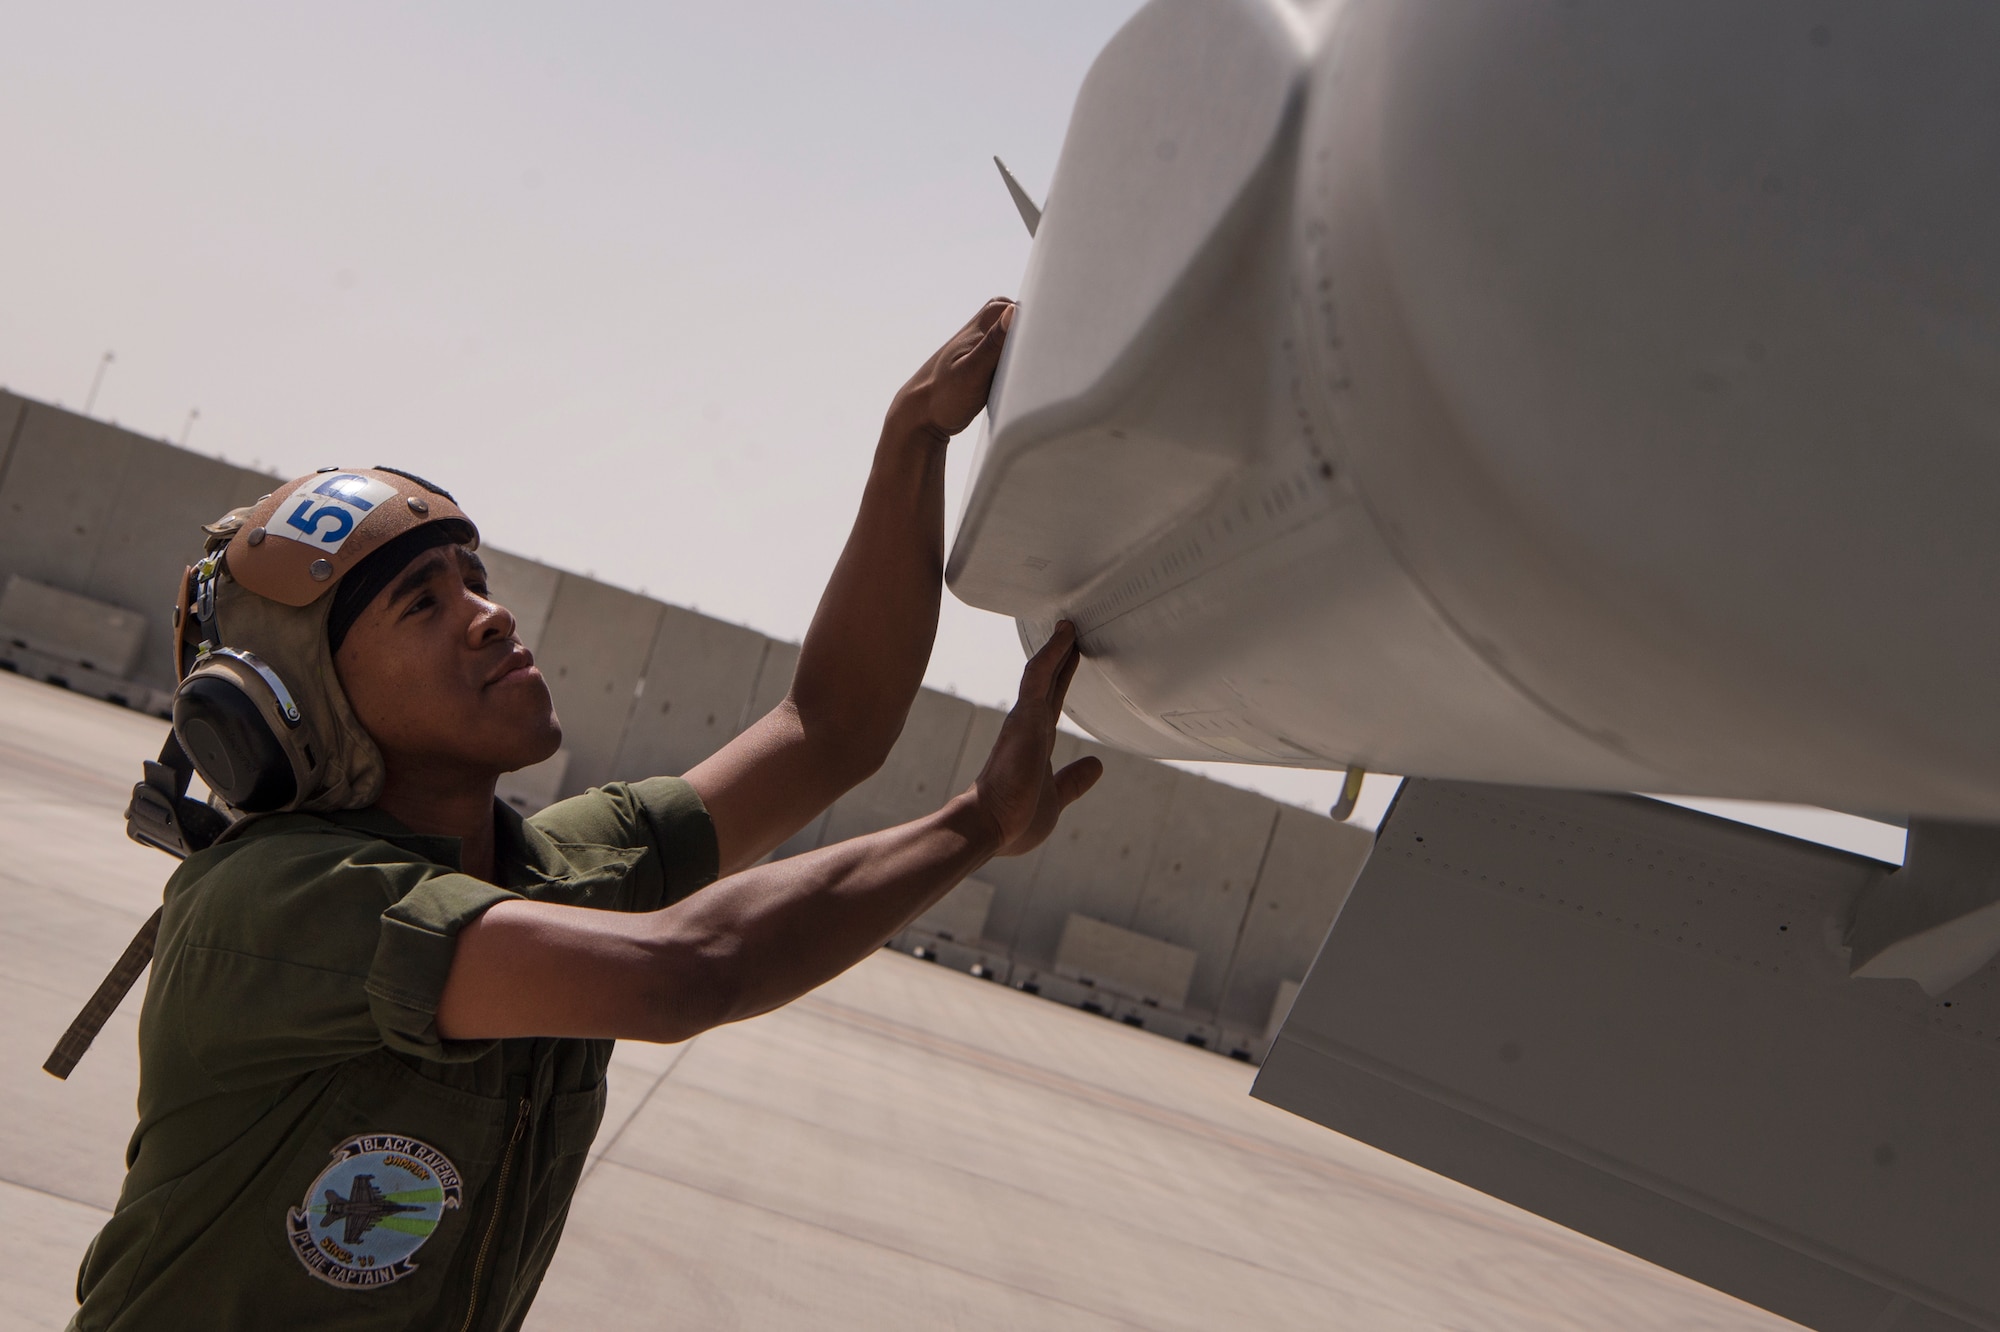 U.S. Navy Airman Shannon Barde, Electronic Attack Squadron 135 (VAQ-135) “Black Ravens” plane captain, conducts a pre-flight inspection for an EA-18G Growler are conducted safely March 7, 2019, at Al Udeid Air Base, Qatar. VAQ-135 is deployed to the U.S. 5th Fleet area of operations in support of naval operations to ensure maritime stability and security in the Central Region, connecting the Mediterranean and the Pacific through the western Indian Ocean and three strategic choke points. Through the use of EA-18G Growler aircraft, VAQ-135 brings electronic based airborne attack and defense capabilities to Al Udeid’s joint environment by detecting, identifying, locating, and suppressing hostile “emitters.” (U.S. Air Force photo by Tech. Sgt. Christopher Hubenthal)